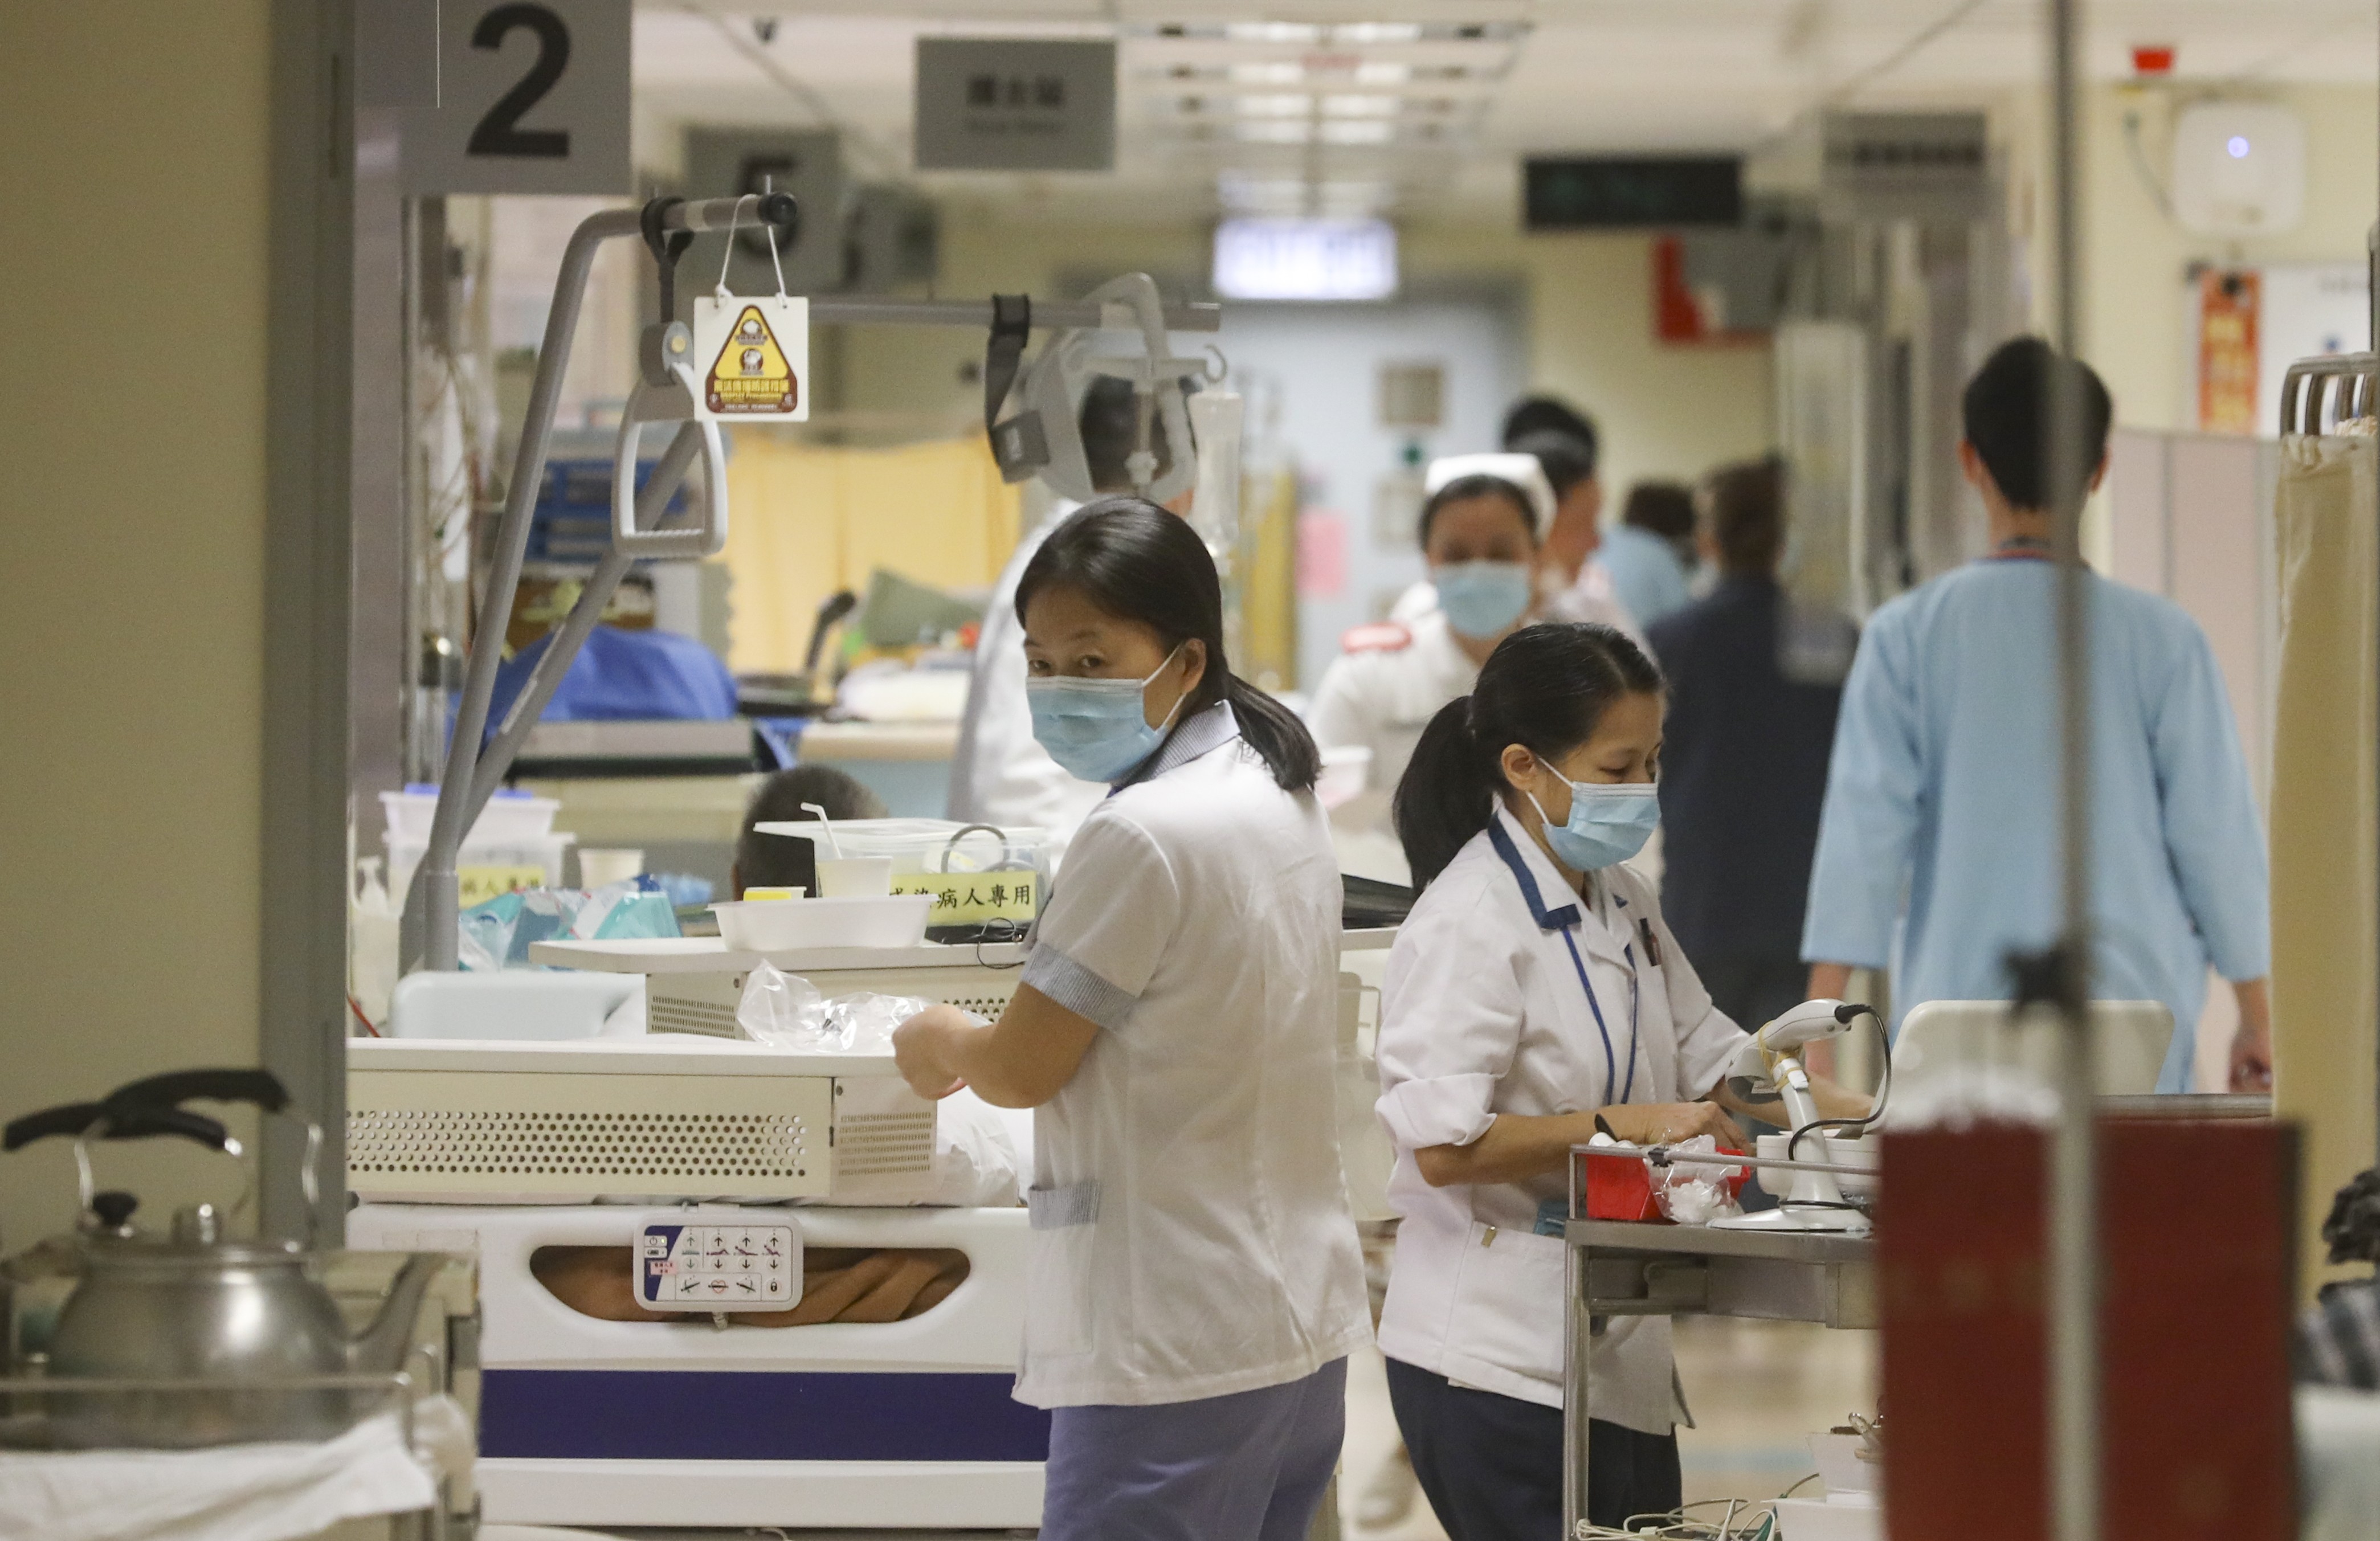 The Hong Kong government has rolled out policies to encourage technological development in the medical sector, but industry insiders say more should be done. Photo: Sam Tsang